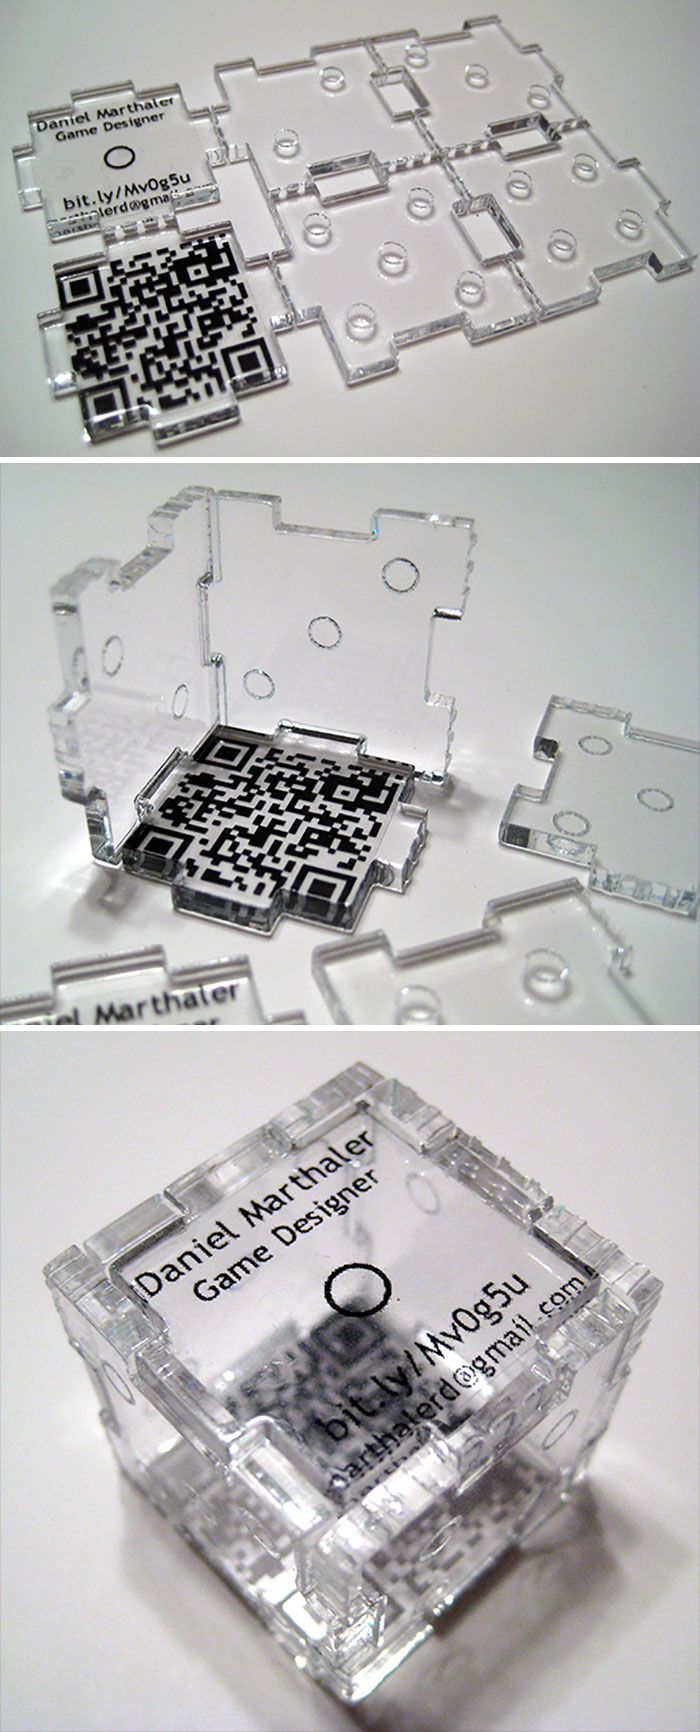 Game Designer's Business Card Which Can Be Built Into The Rolling Die